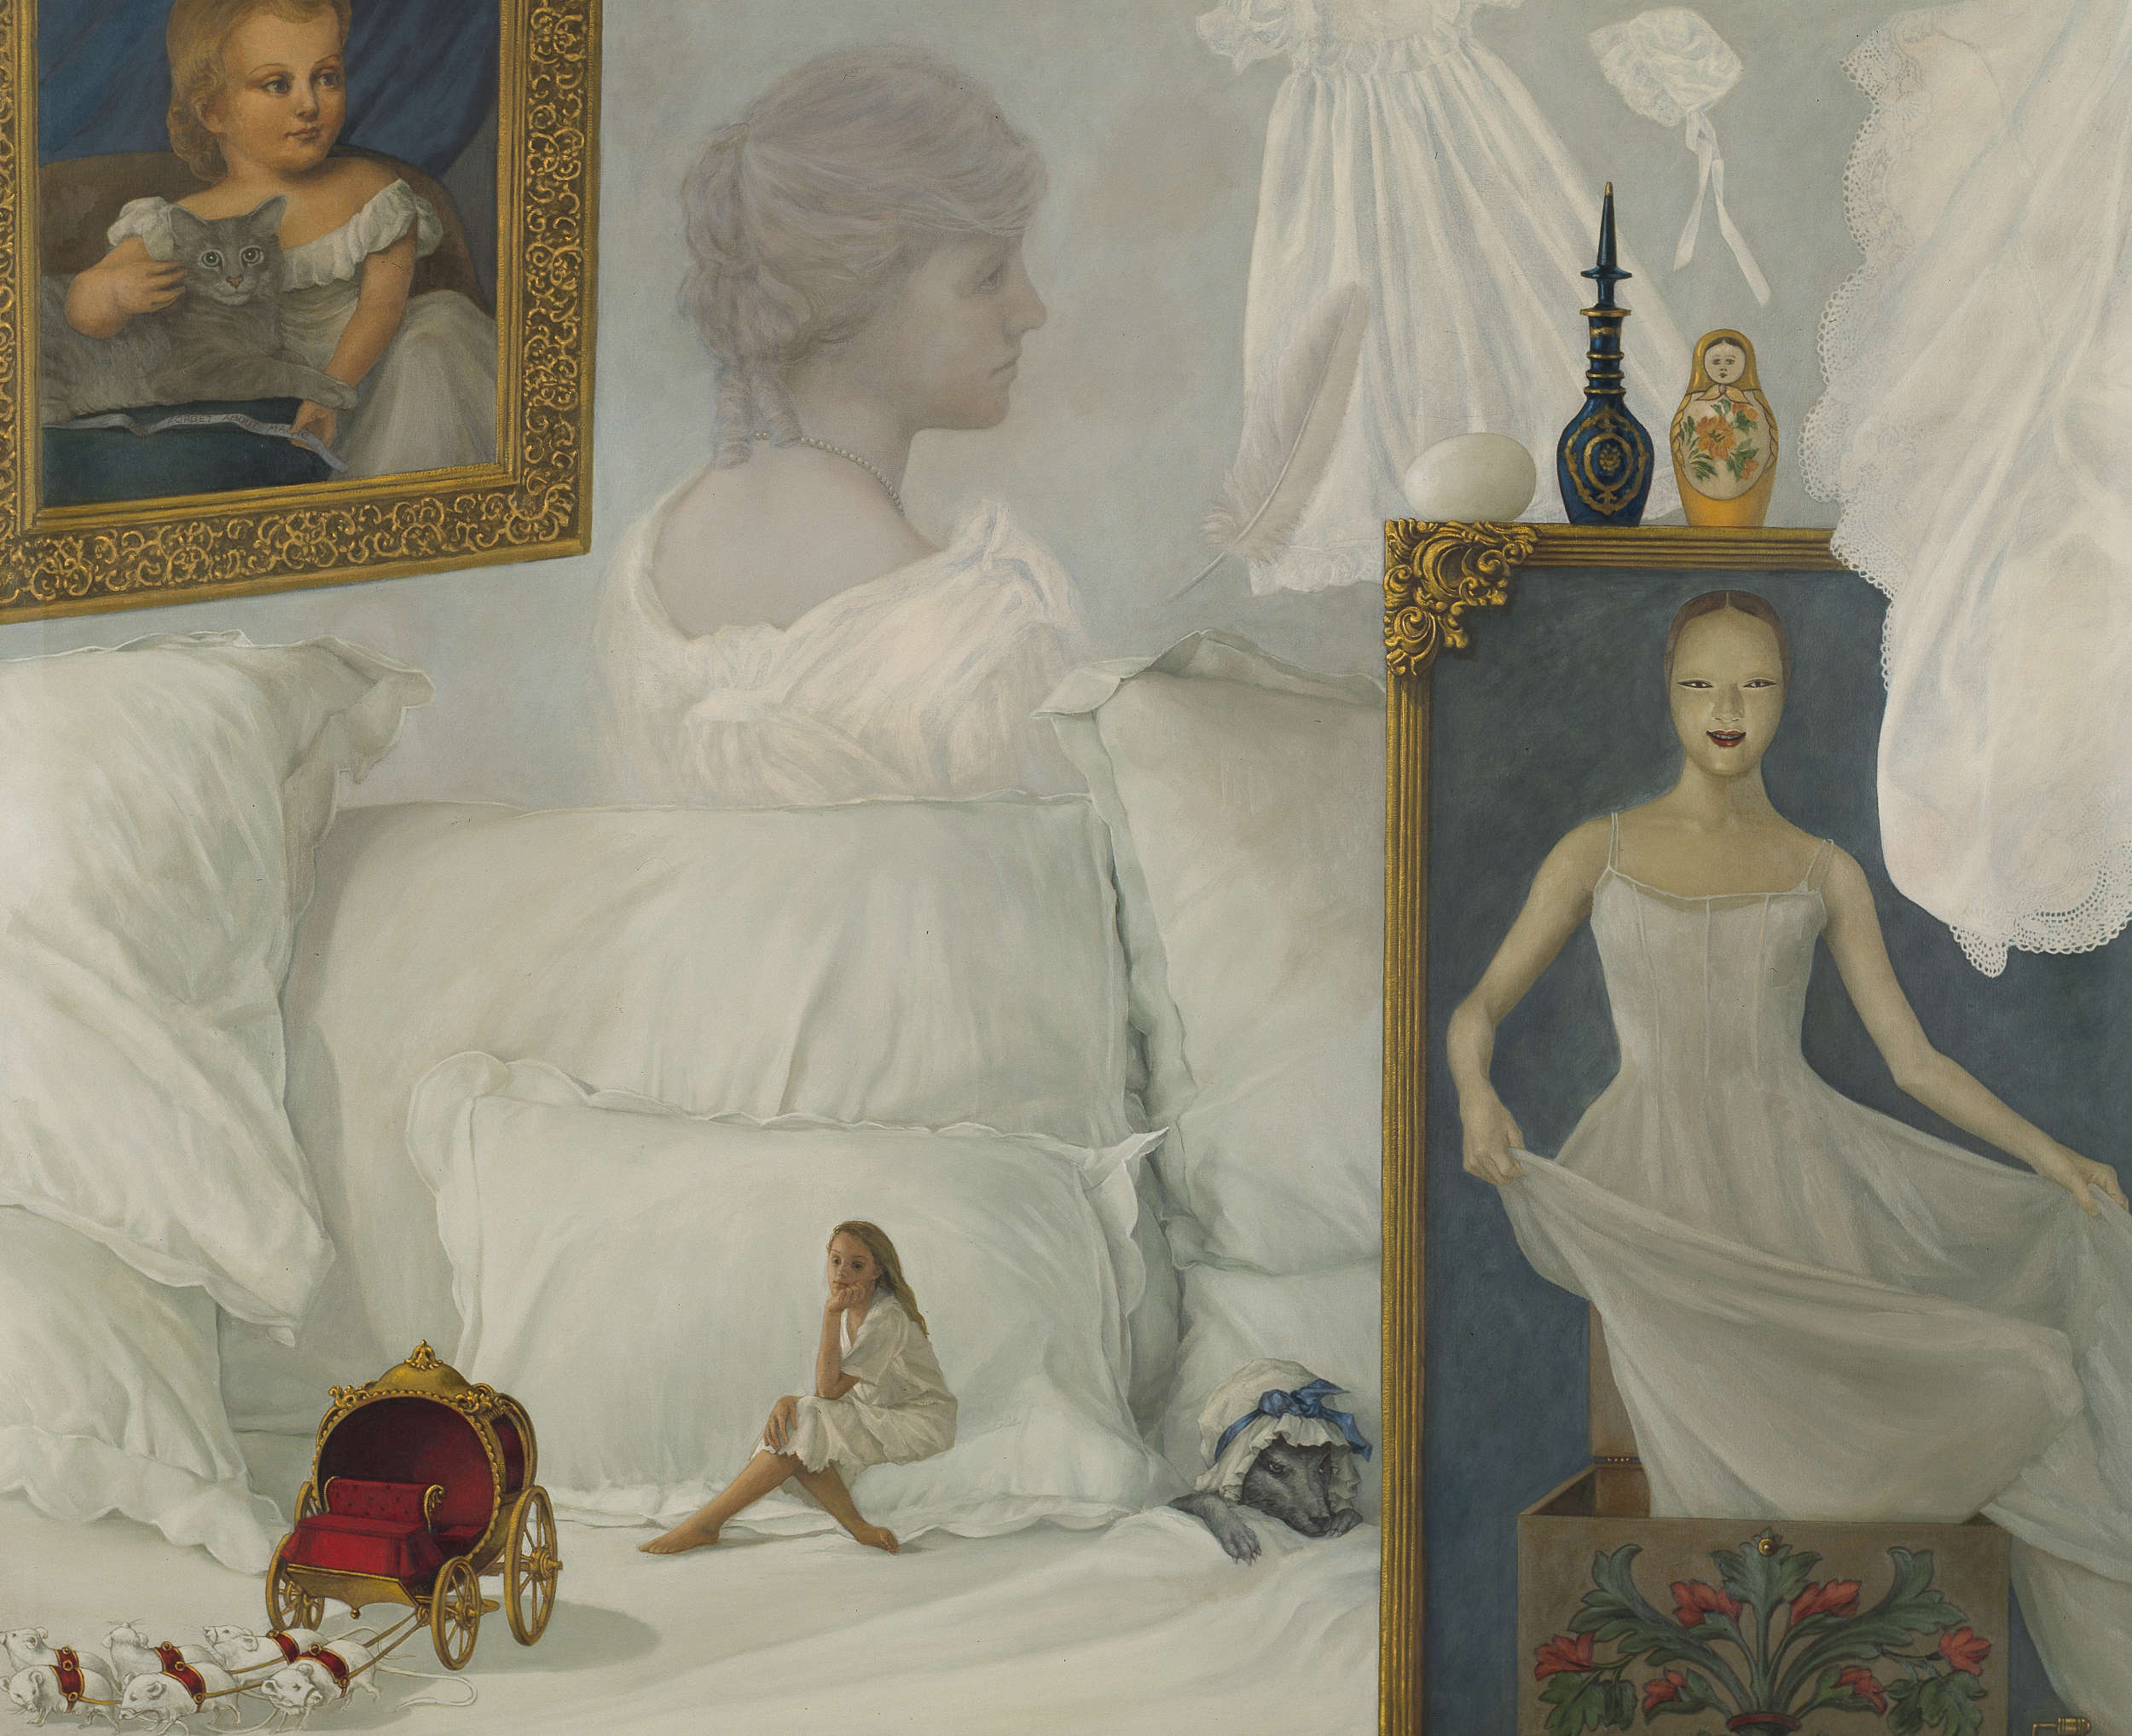 white pillows, white drapery, antique white dress, painting of little girl with a cat in a gold carved frame, Cinderella's coach with white mice pulling it, wolf with sleeping cap under the covers of the bed, Russian doll, 'Jill in a box'